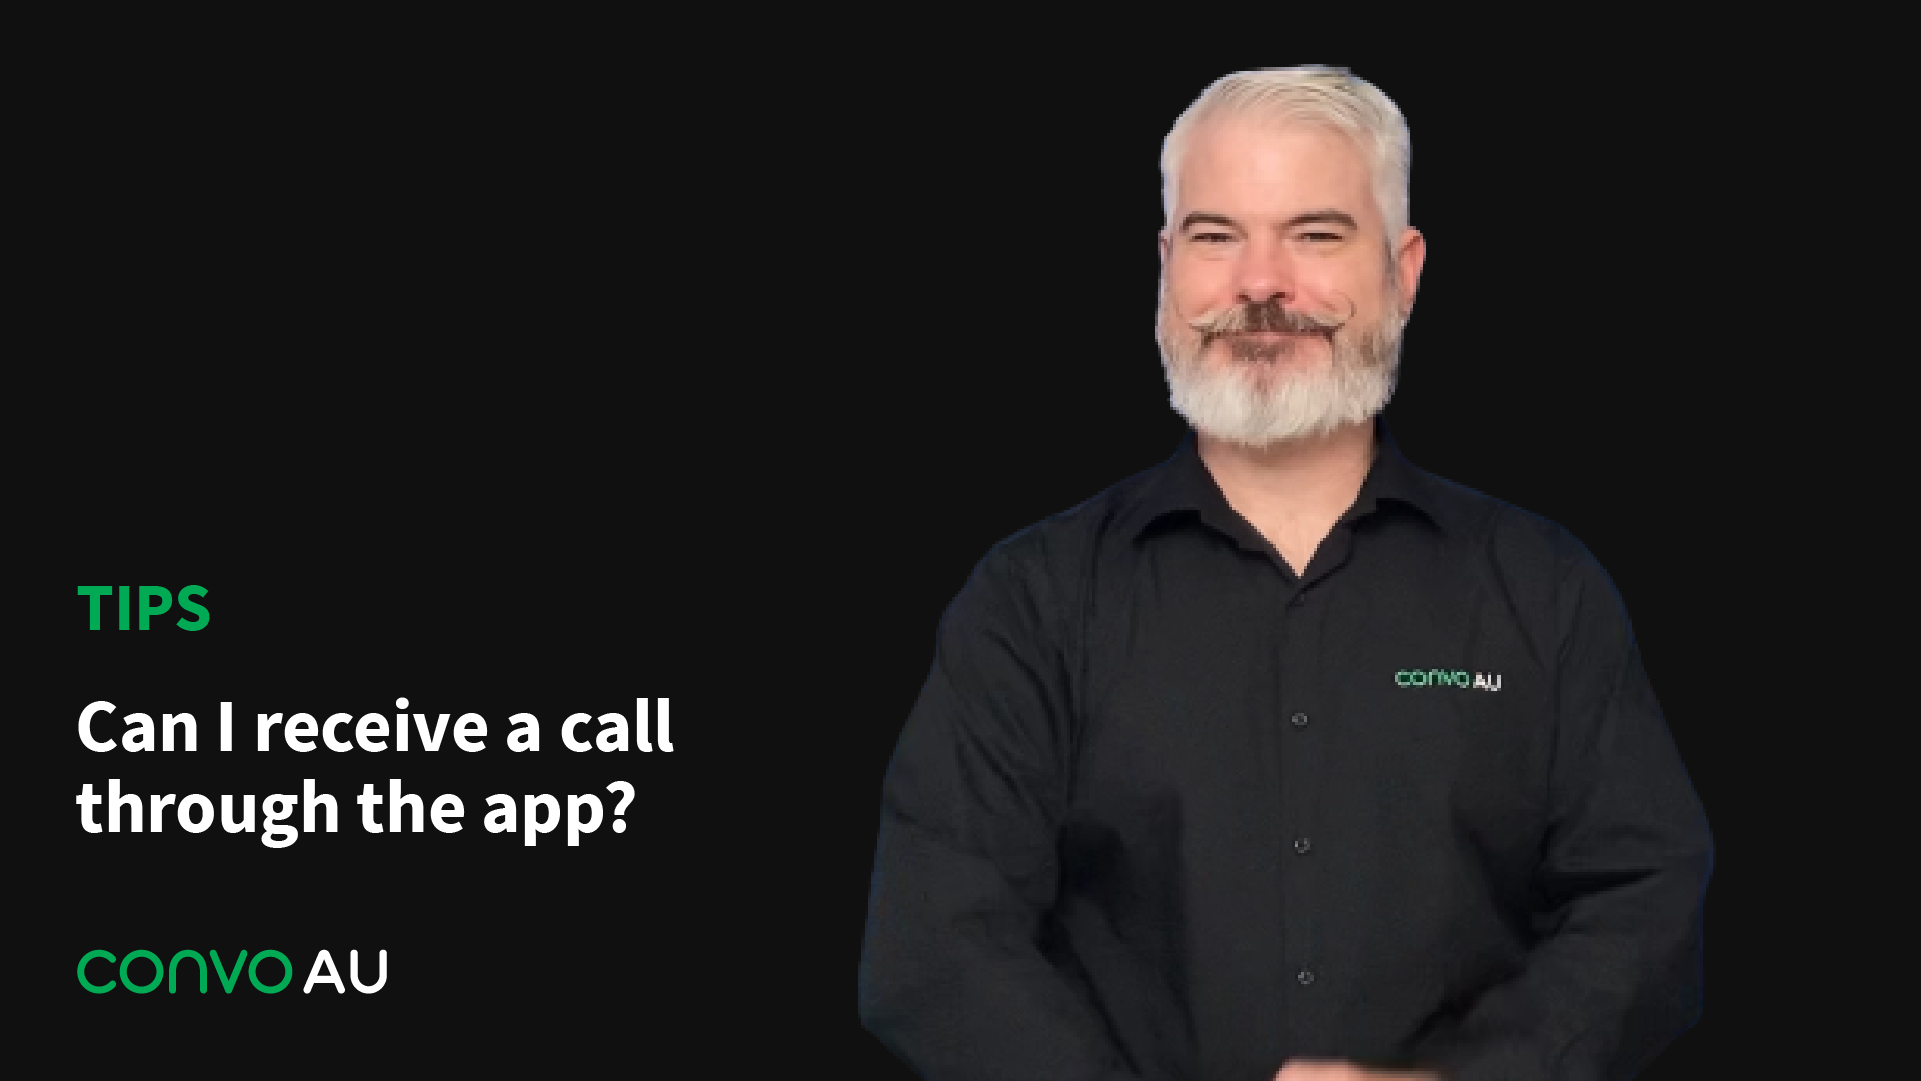 Tips: Can I receive a call through the app?